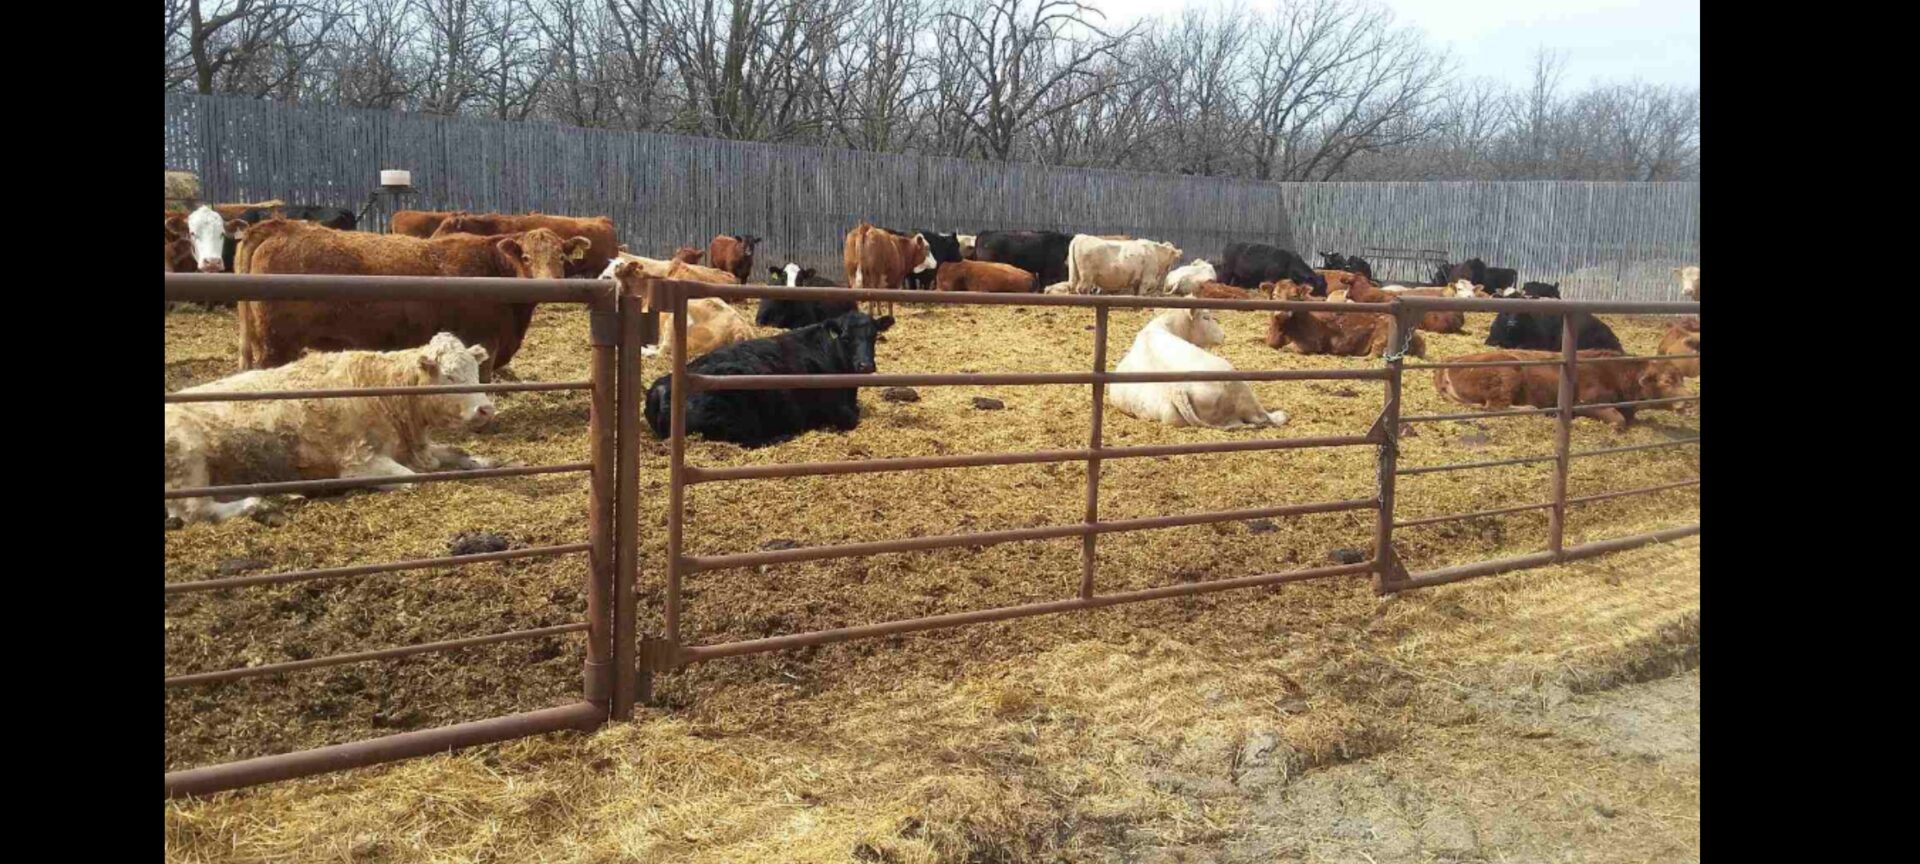 A herd of cattle in an enclosed pen.